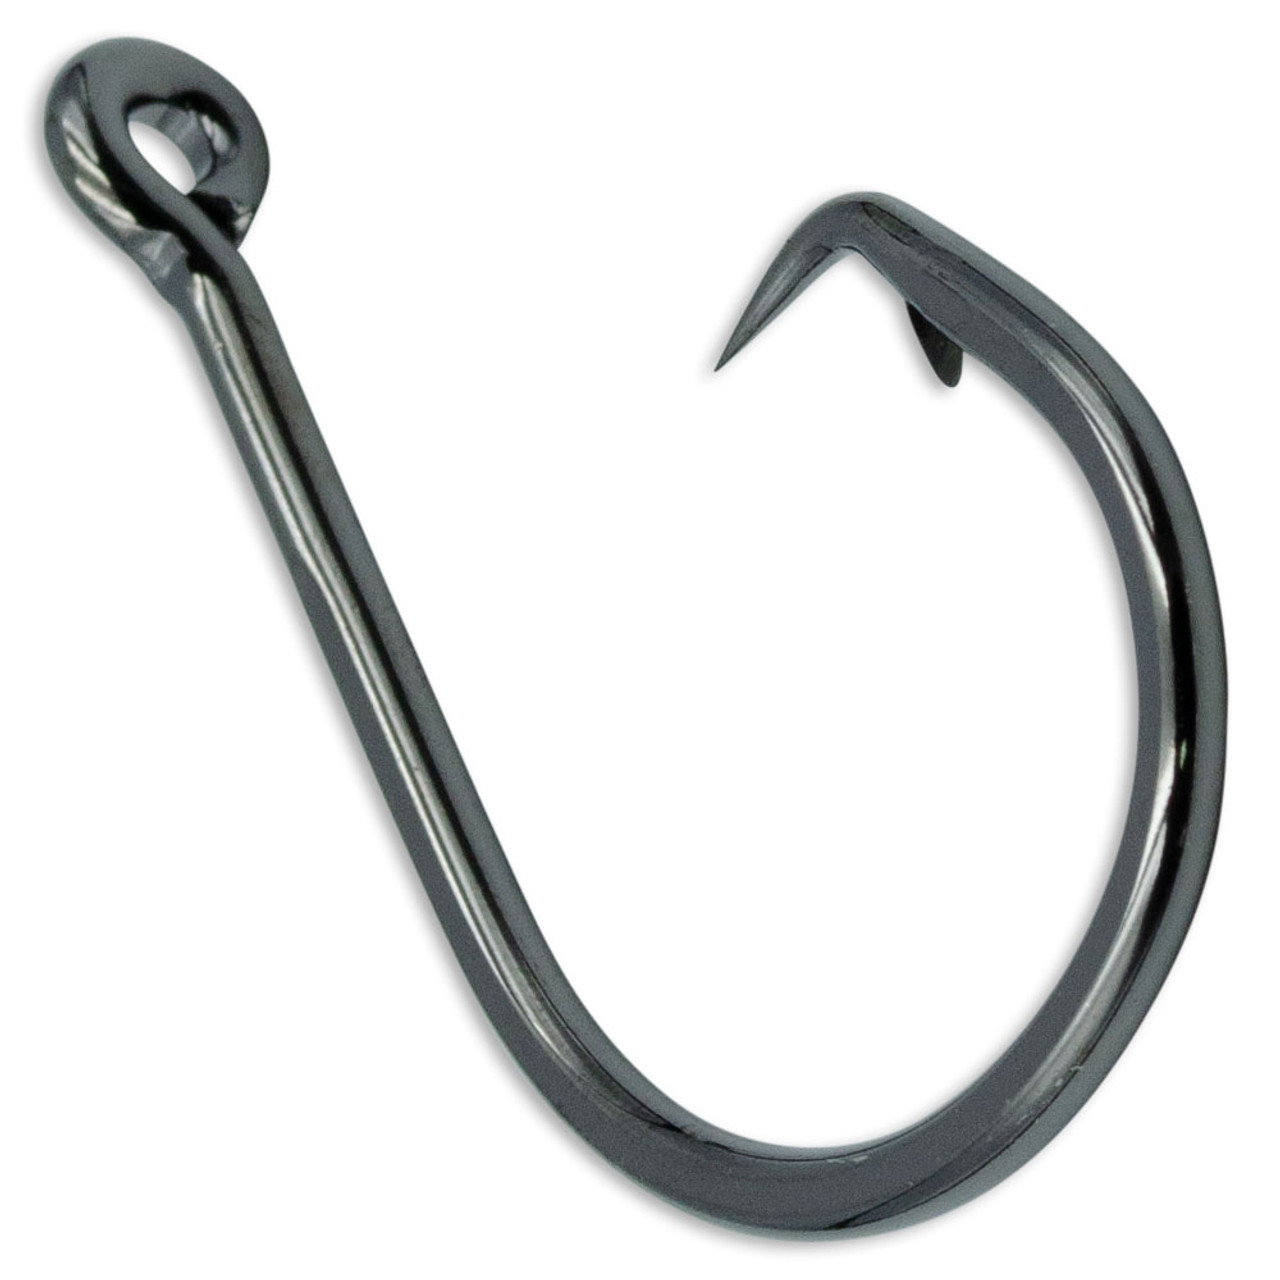 Buy Owner Grander Tournament Marlin Circle Hooks 16/0 Qty 2 online at